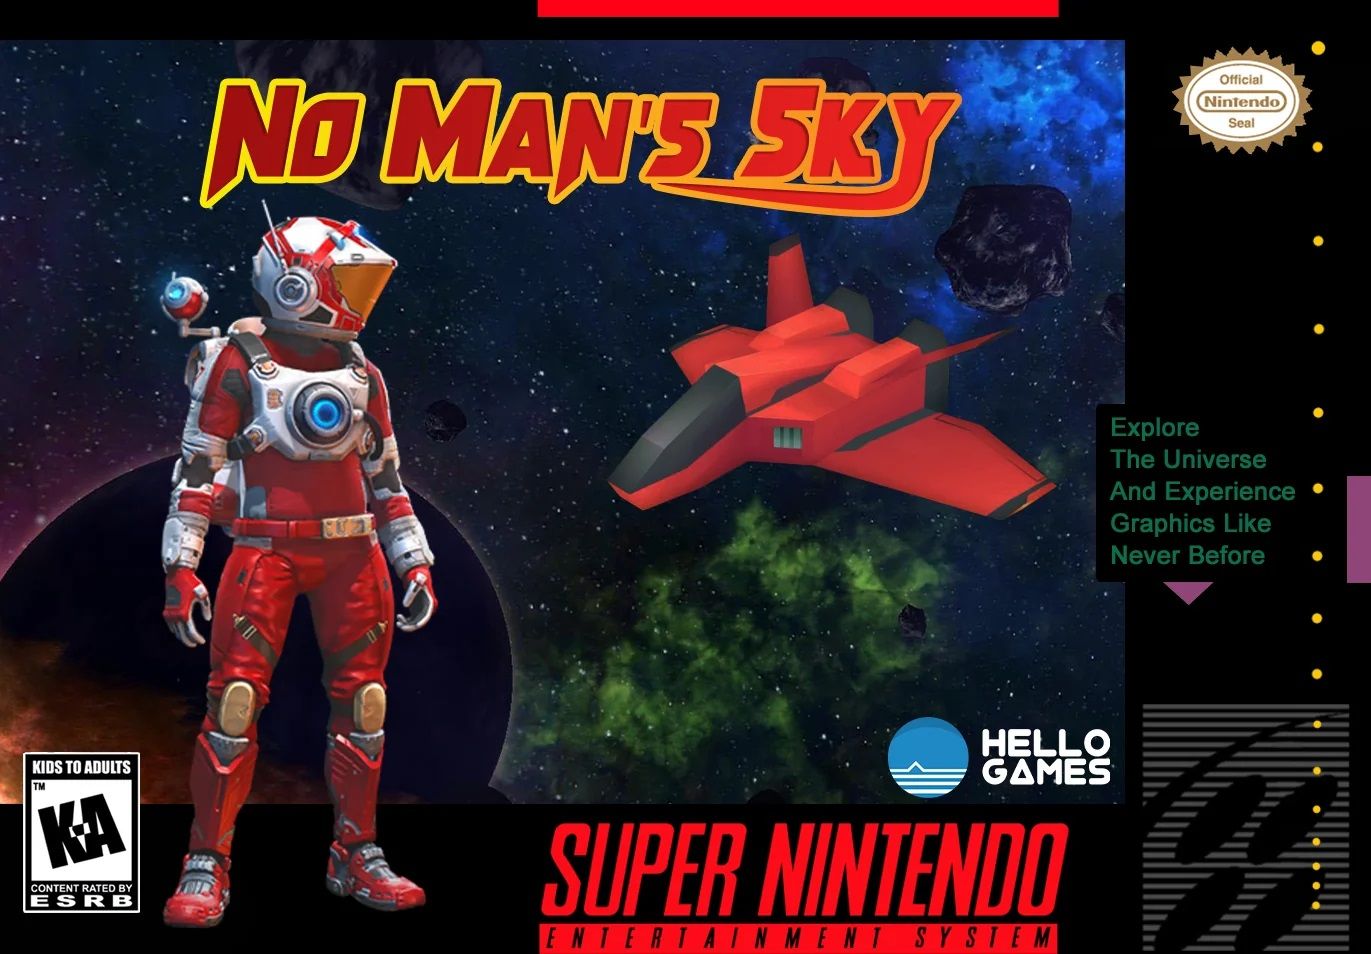 Image showing what the No Man's Sky box art may have looked like on the SNES.